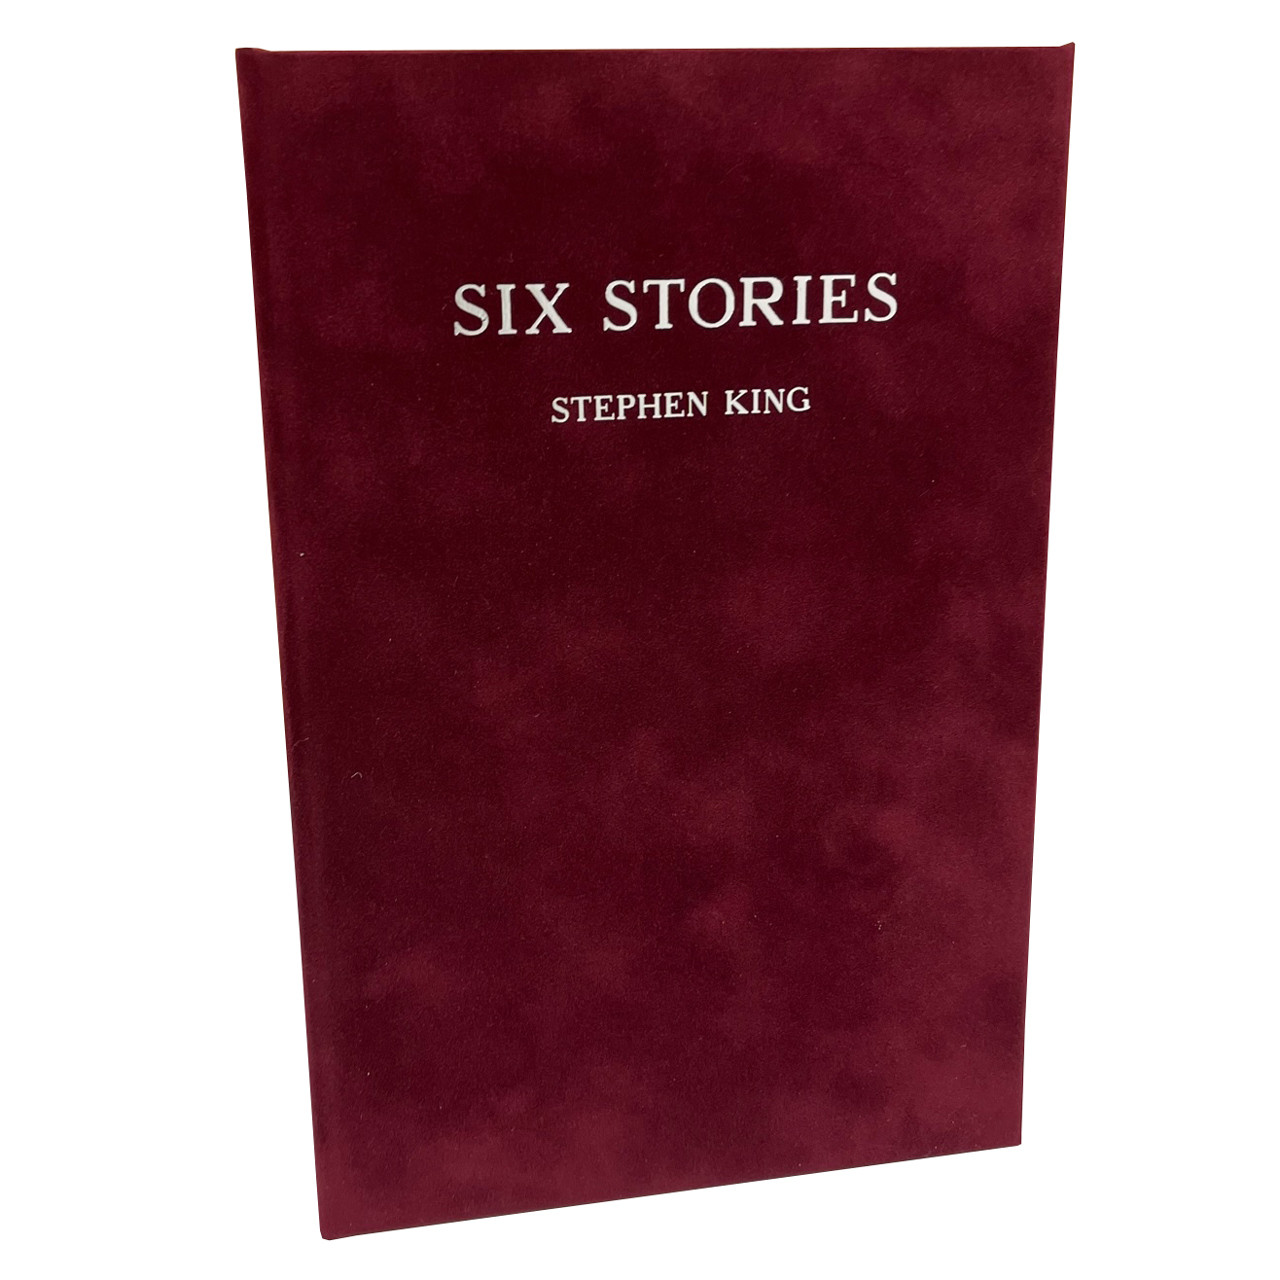 Traycase Presentation Box for Stephen King "SIX STORIES" Signed Limited Edition [NO BOOK INCLUDED]